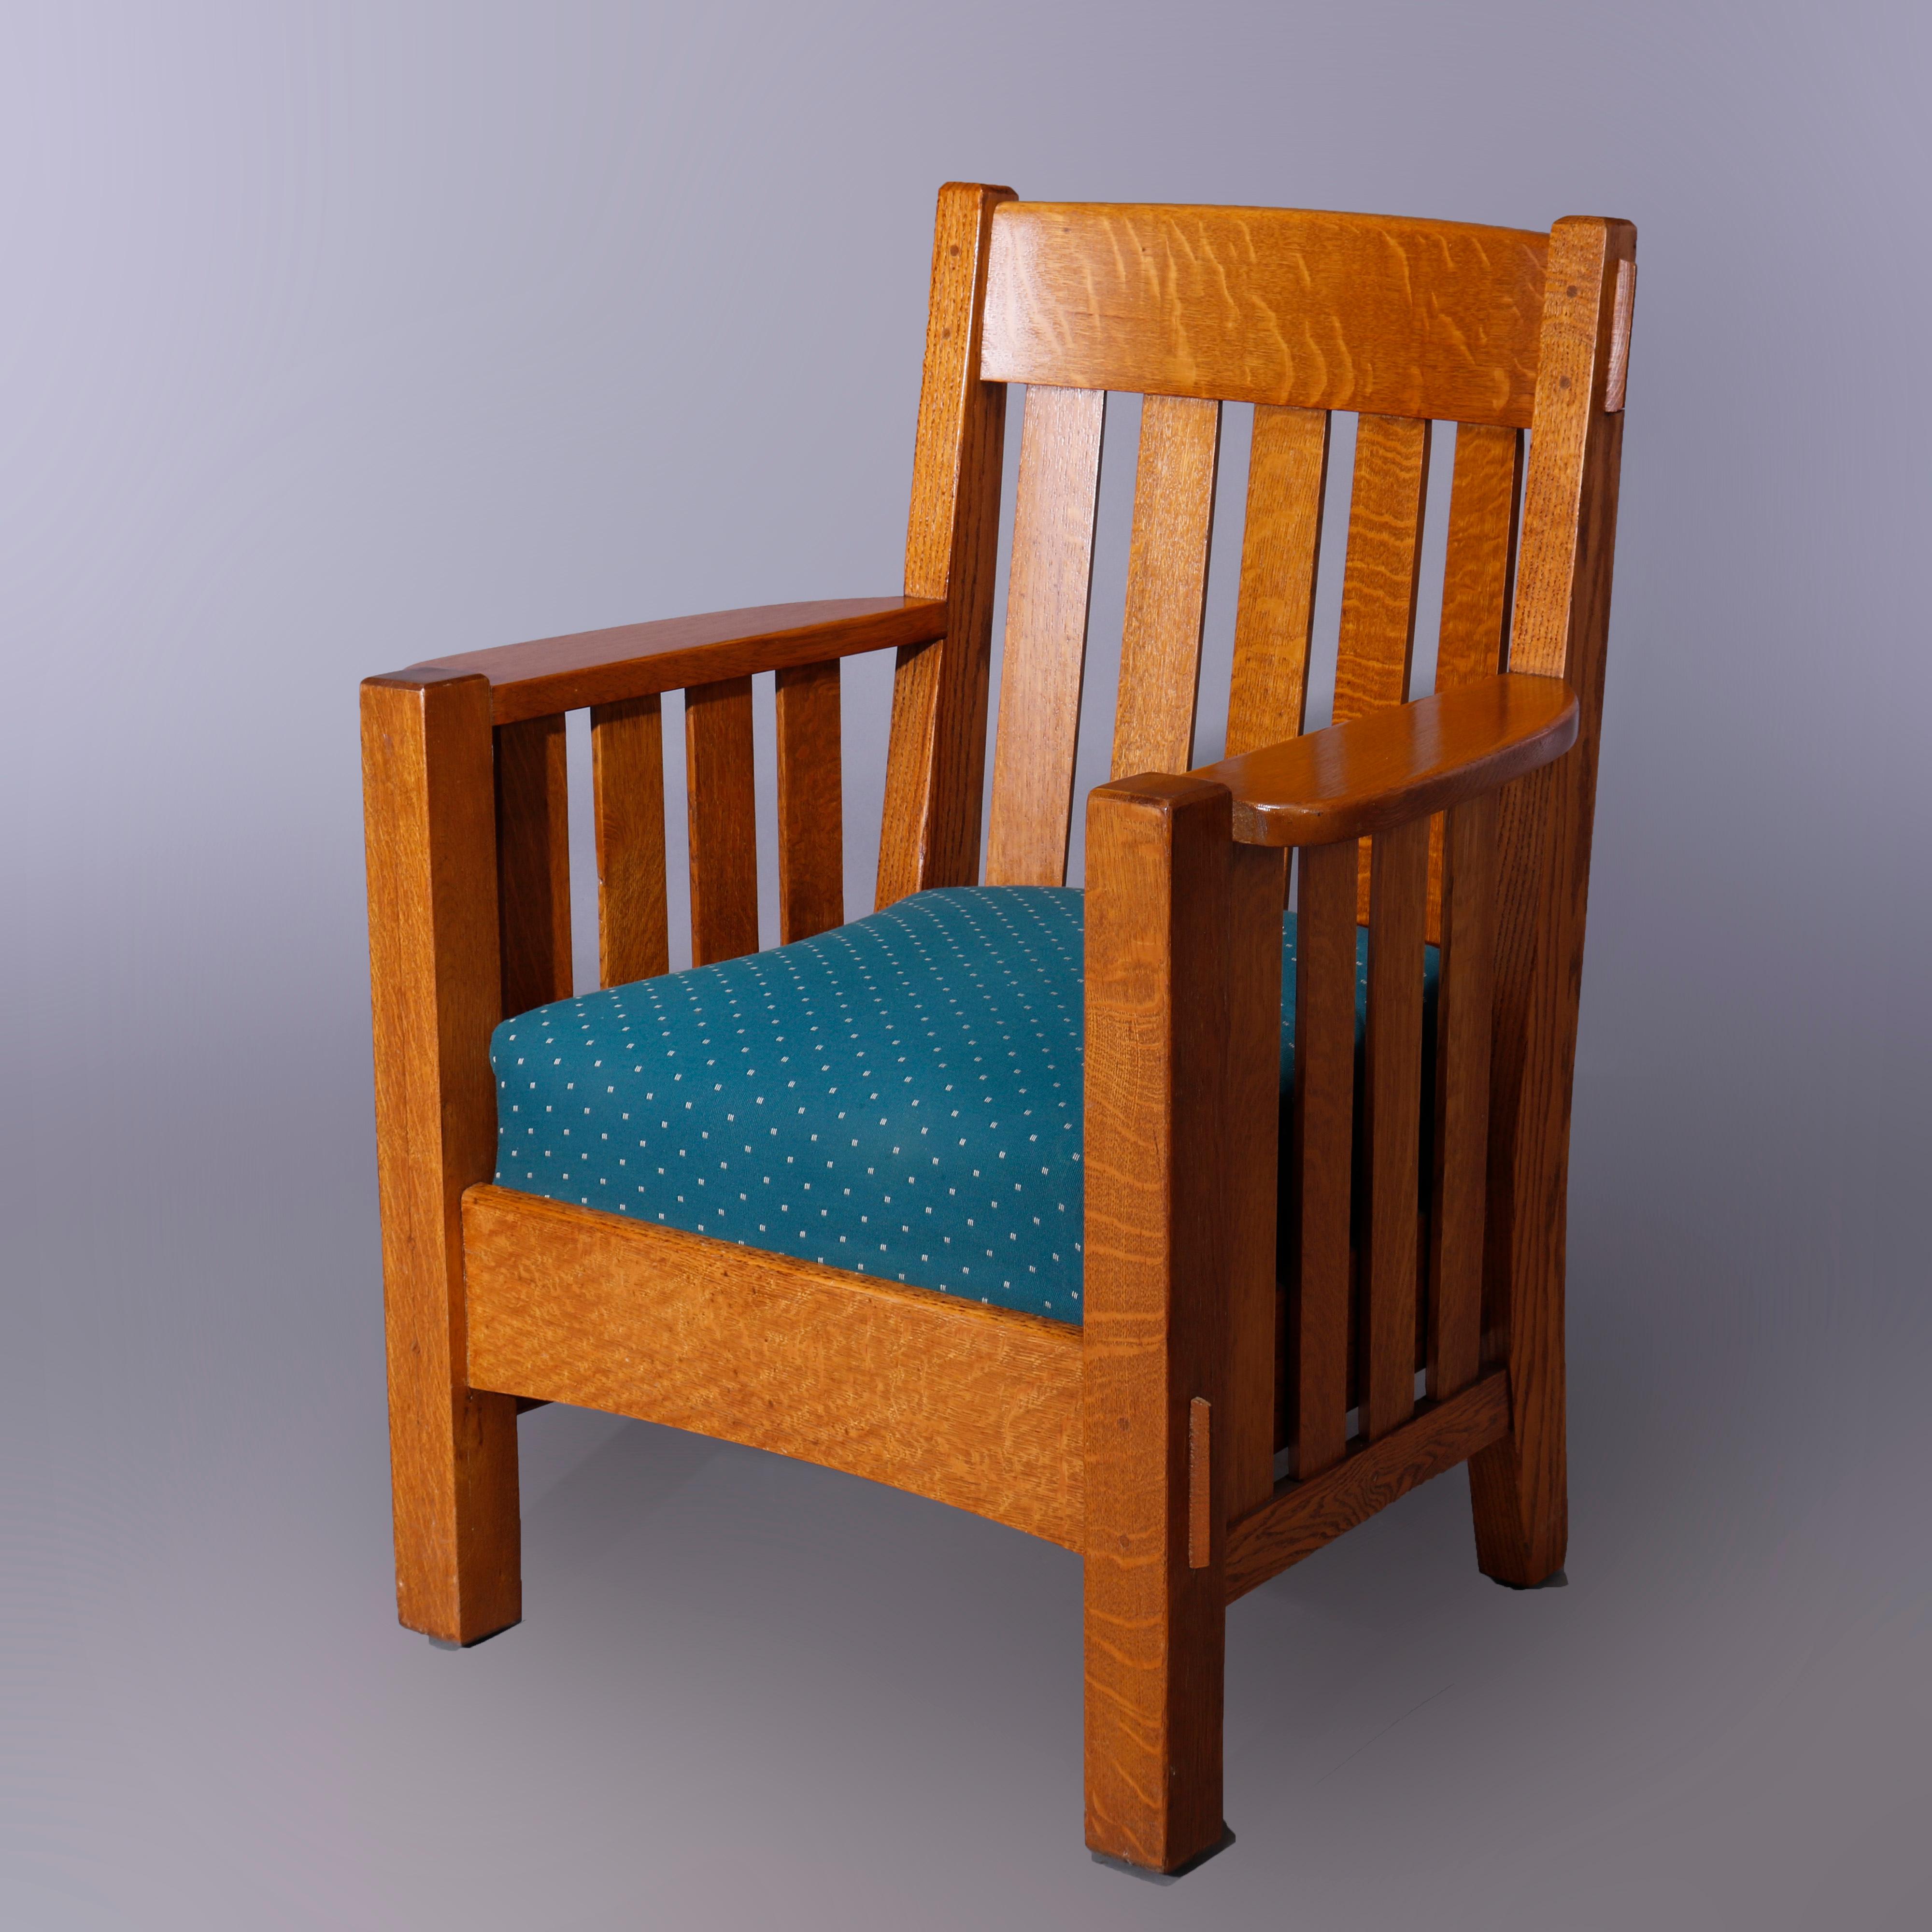 An antique Arts and Crafts harden mission oak arm chair offers slat back and sides with cushion seat, c1910

Measures - 38.25'' H x 30.5'' W x 26.5'' D; seat height 18.5